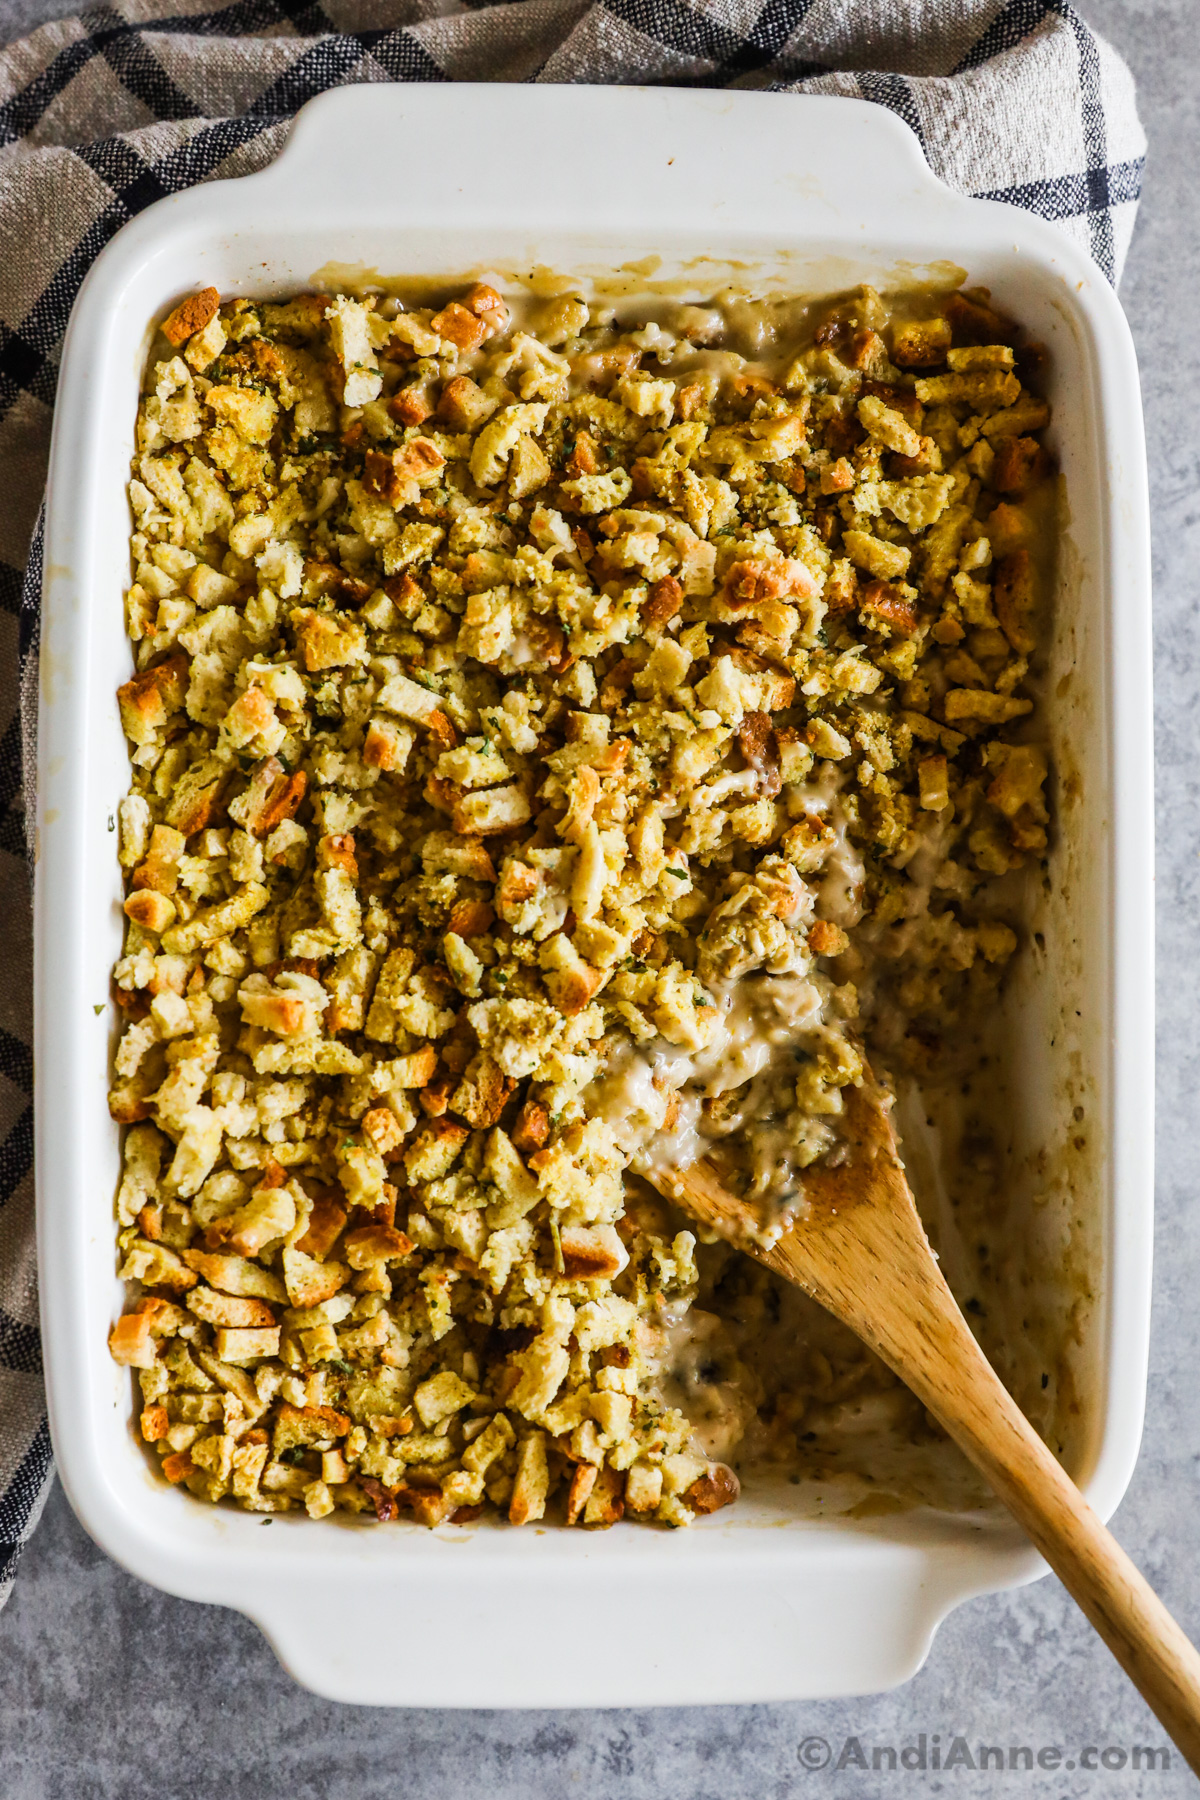 Chicken stuffing bake in a white dish with a wood spoon